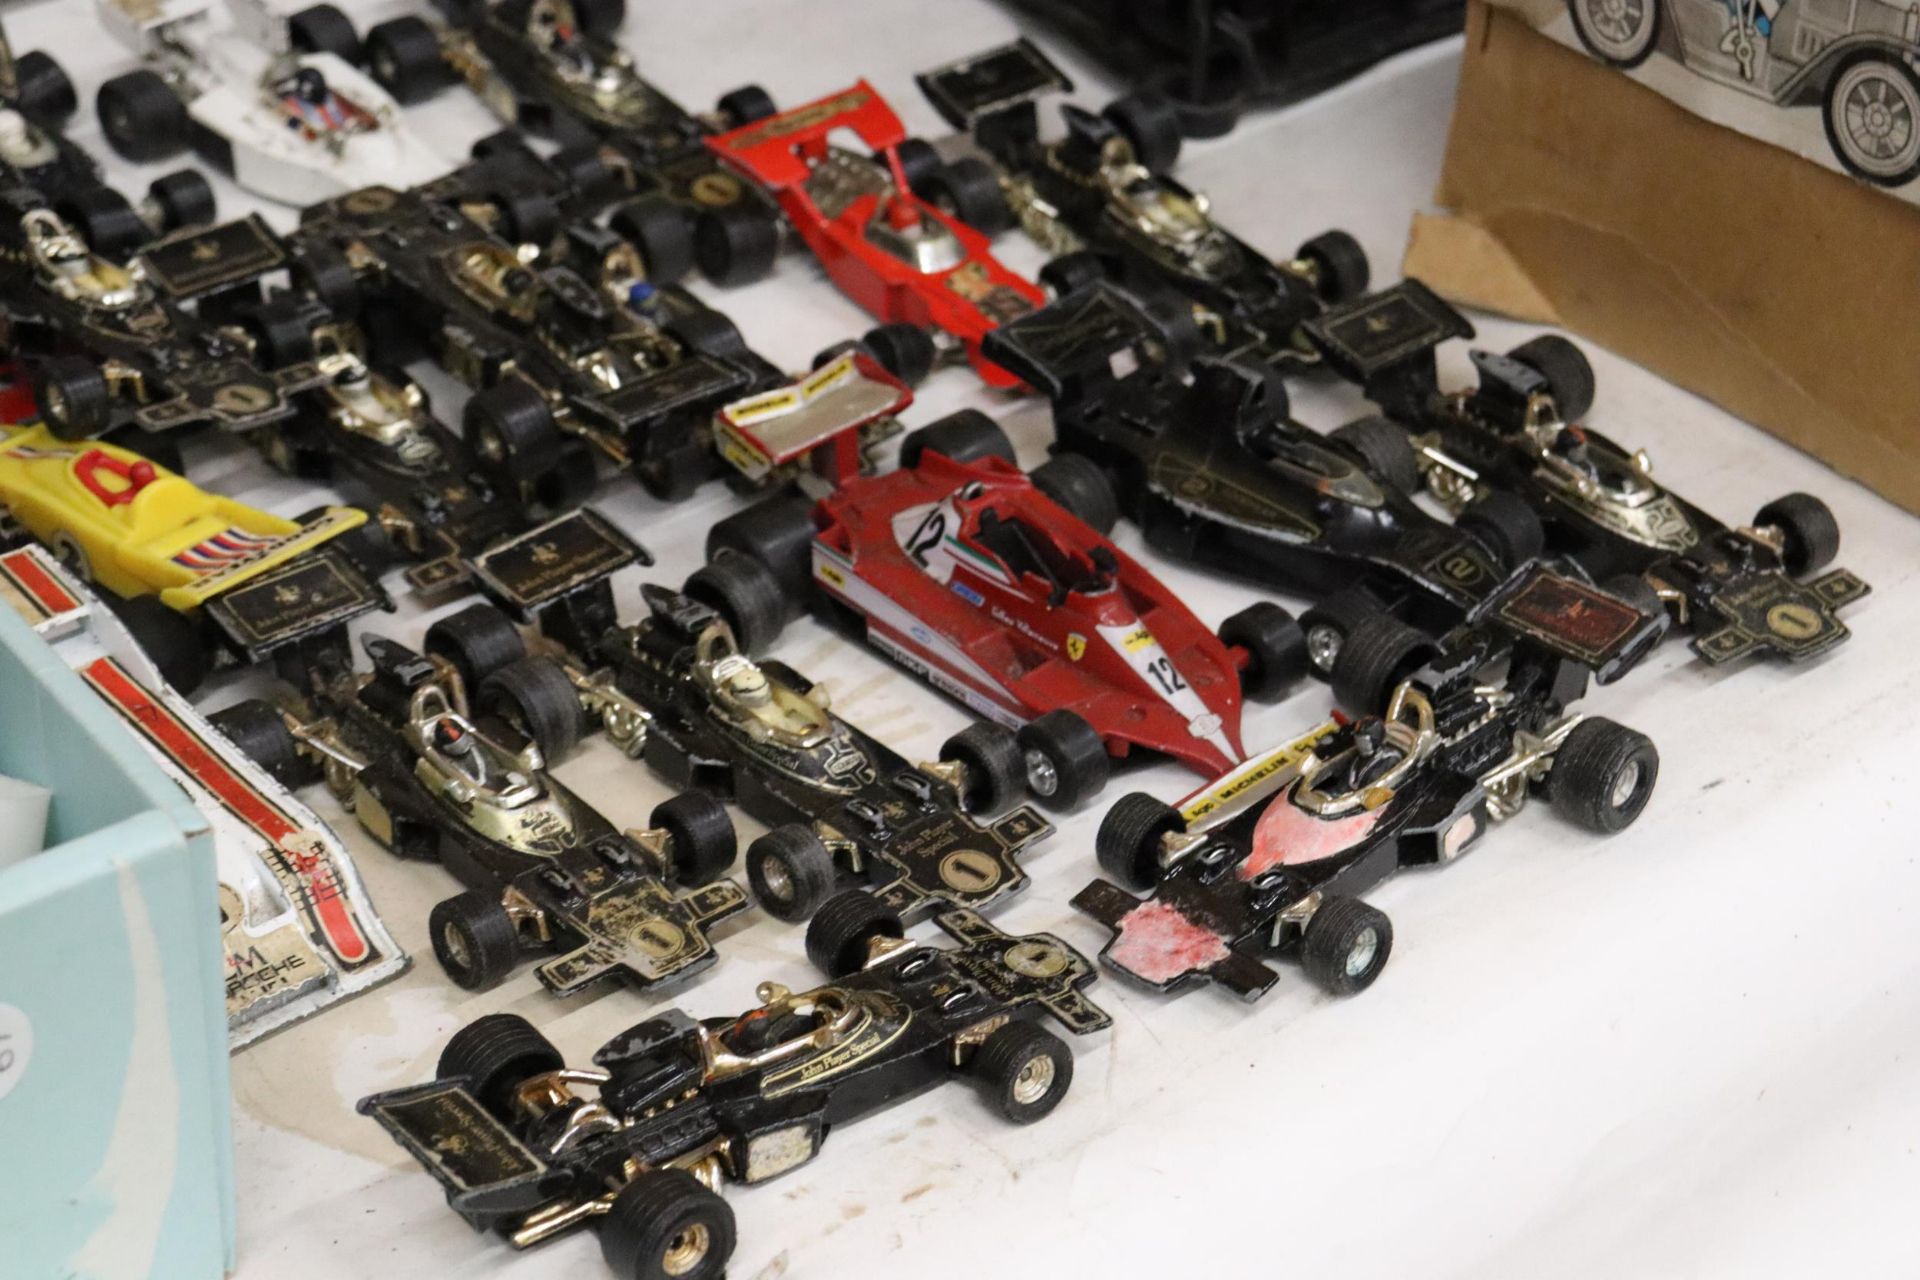 A LARGE QUANTITY OF VINTAGE DIE-CAST CORGI AND MATCHBOX F1 RACING CARS - Image 9 of 9